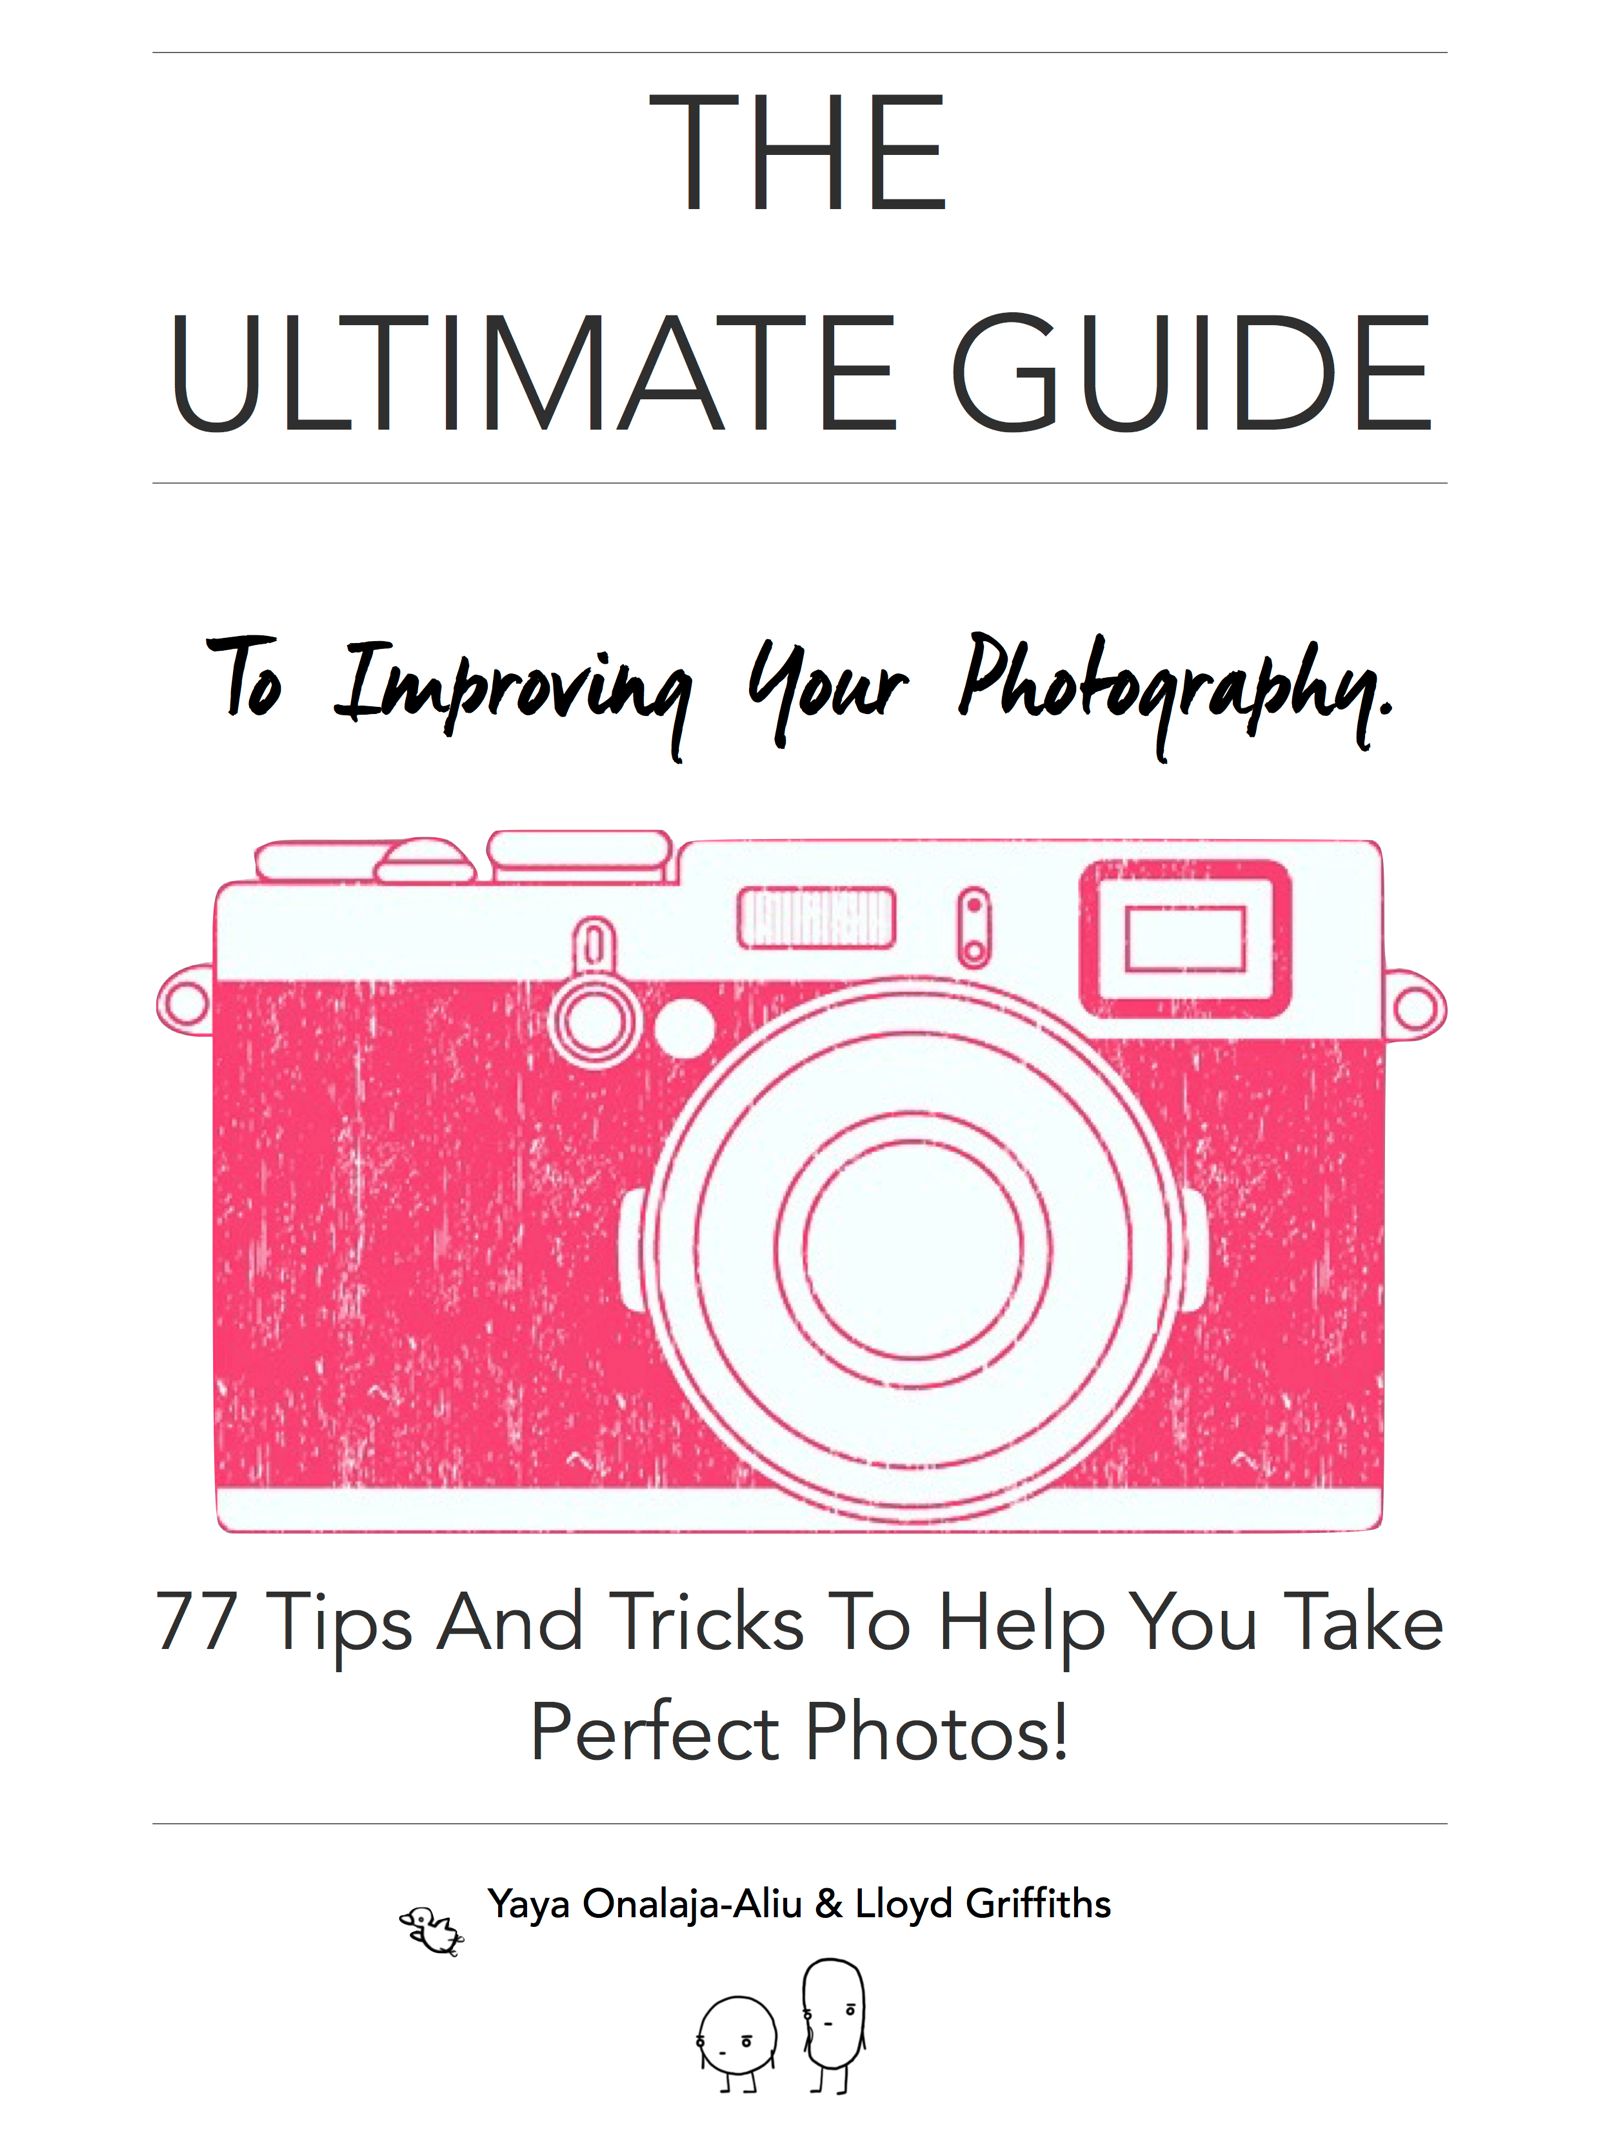 The Ultimate Guide To Improving Your Photography: 77 Tips And Tricks To Help You Take Perfect Photos! (8)